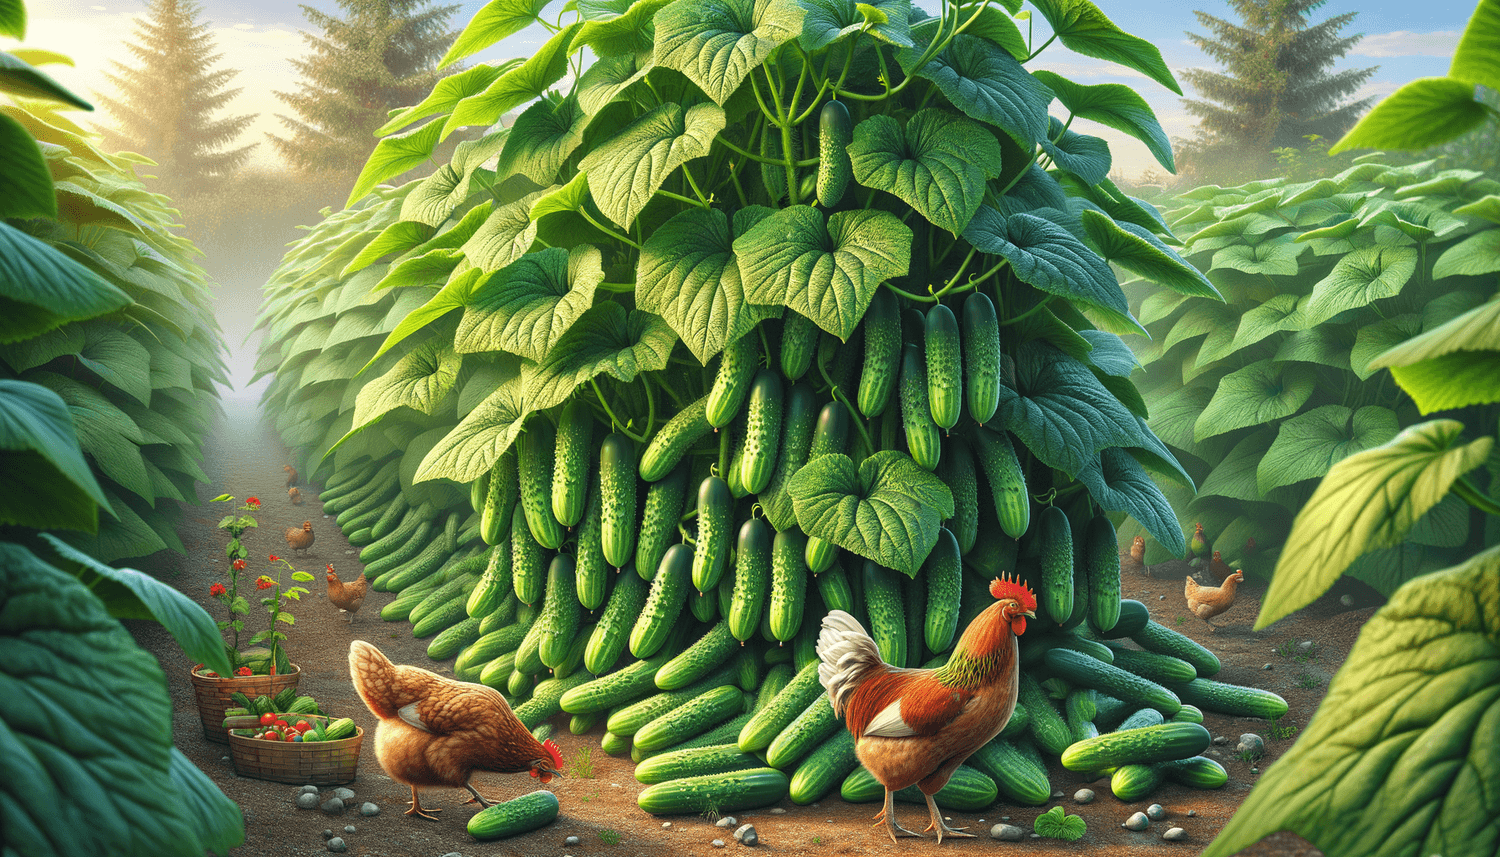 Can Chickens Eat Cucumber Plants?